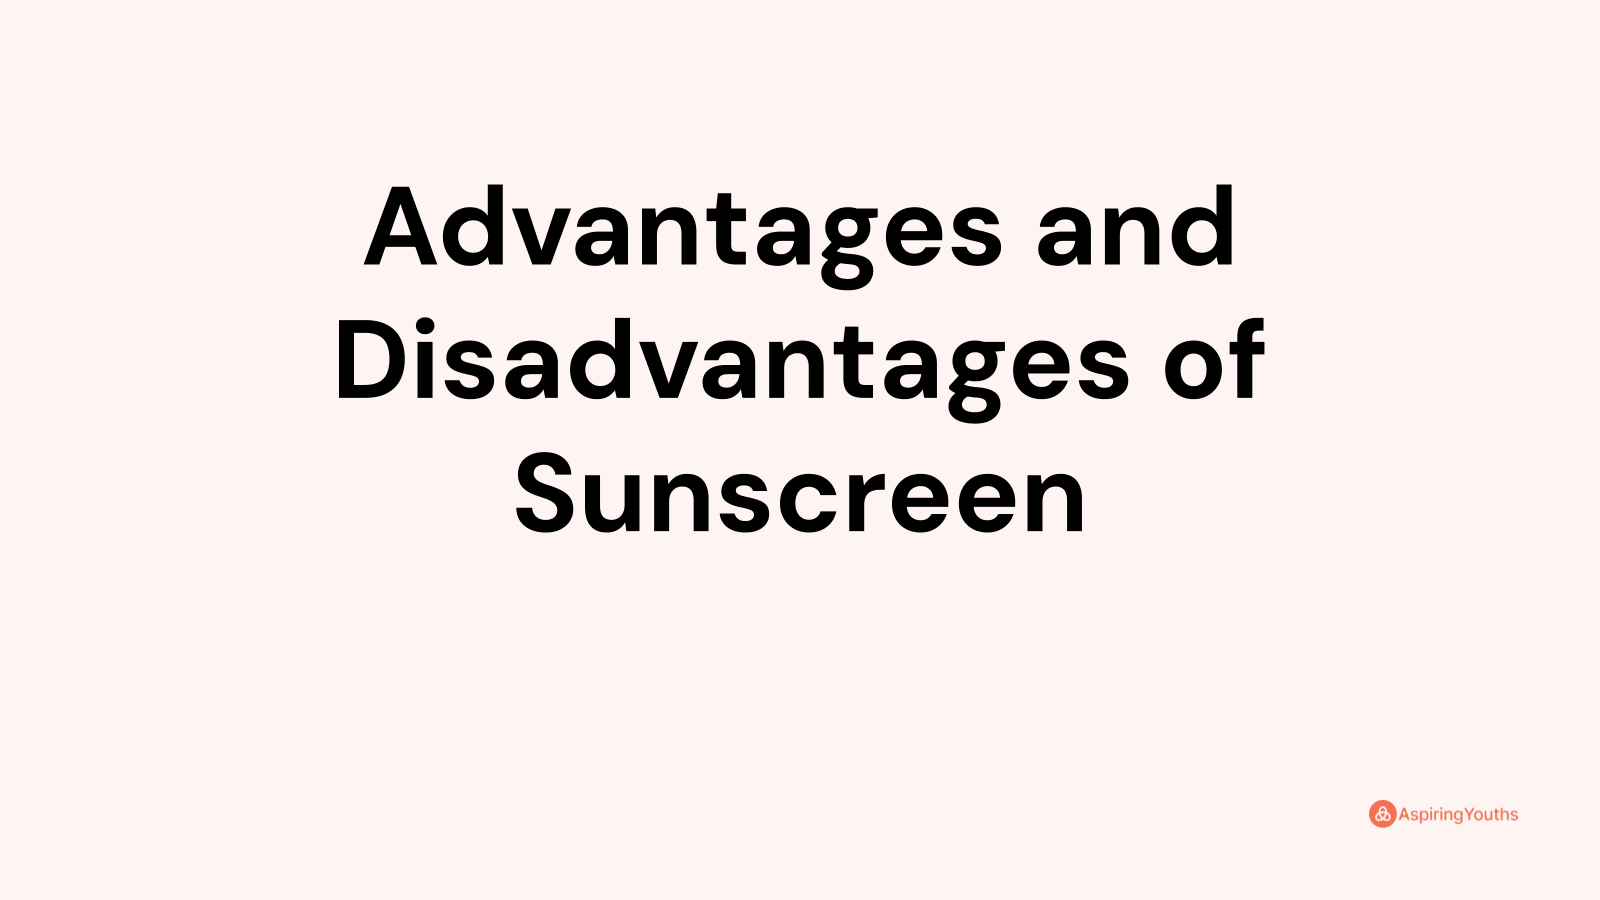 Advantages and disadvantages of Sunscreen